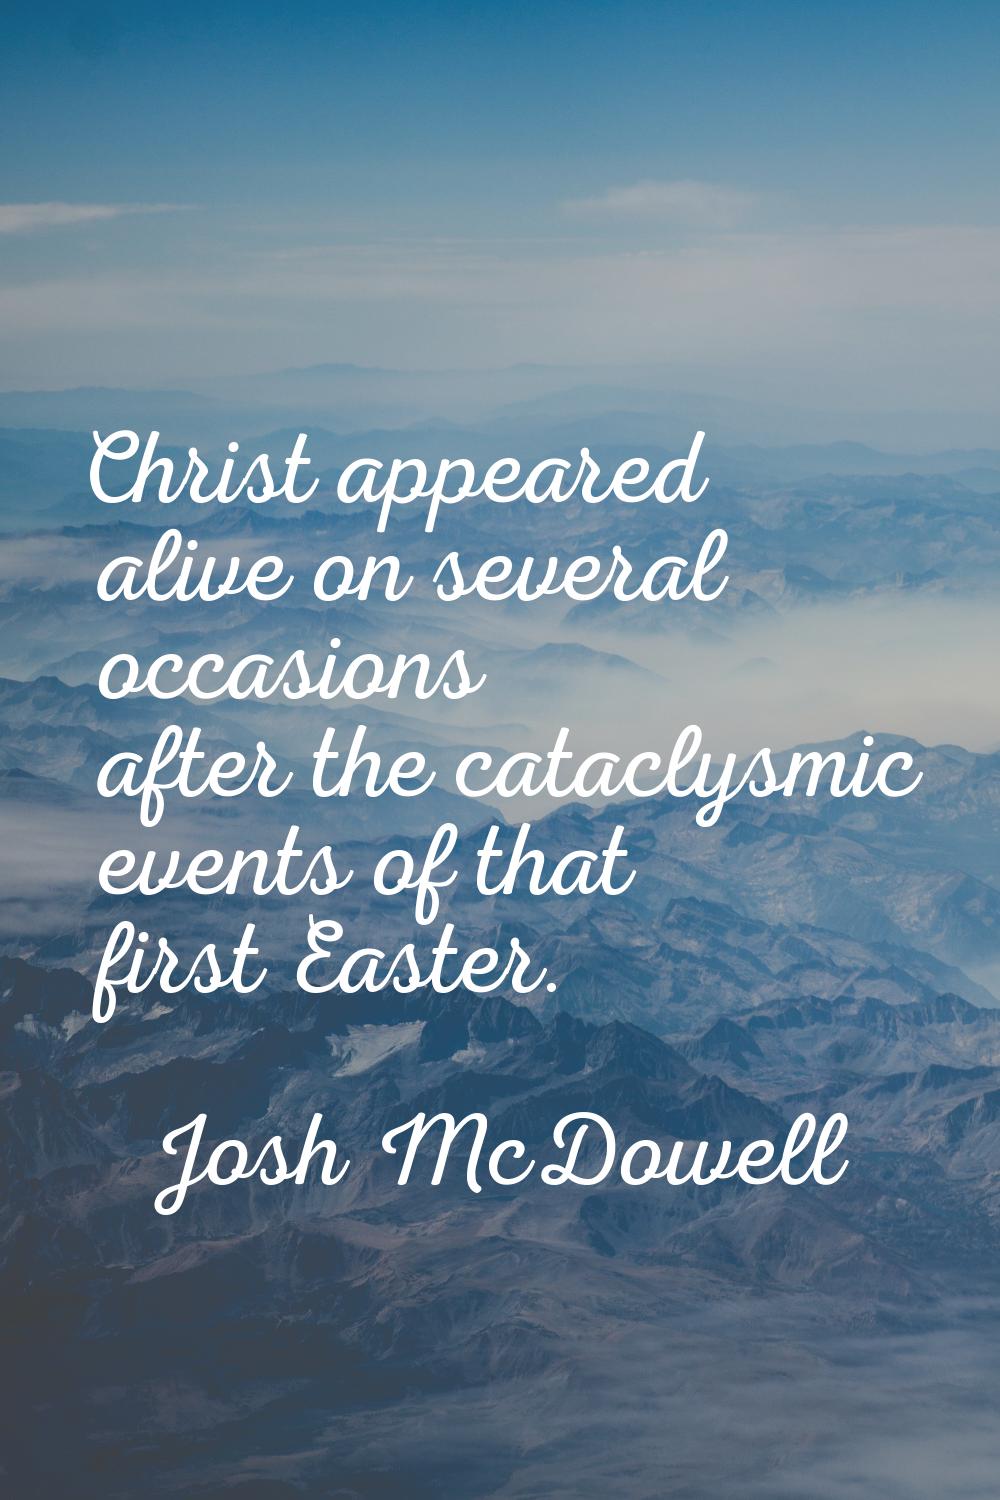 Christ appeared alive on several occasions after the cataclysmic events of that first Easter.